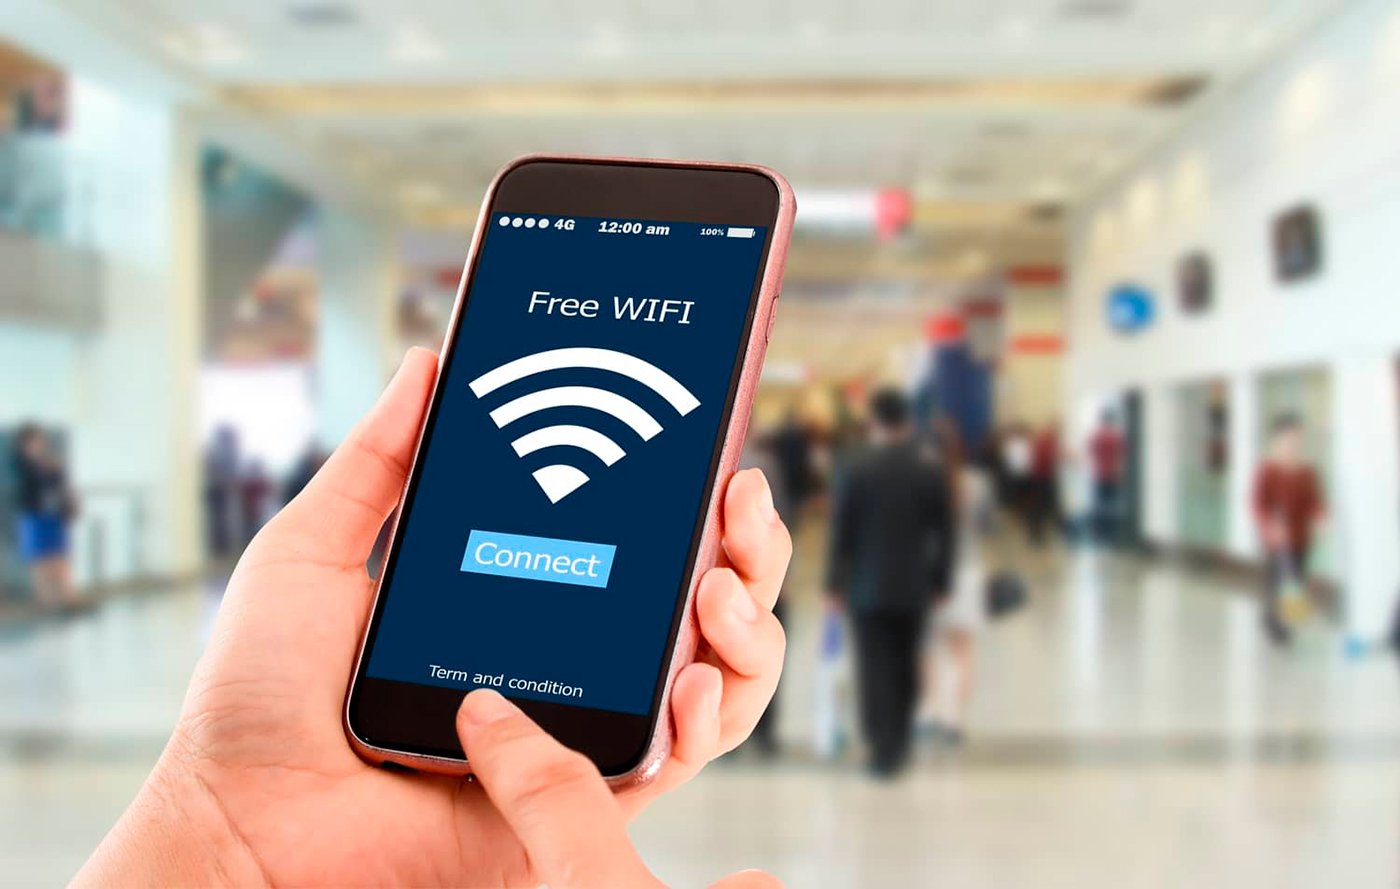 Free WiFi: how to connect to public networks safely